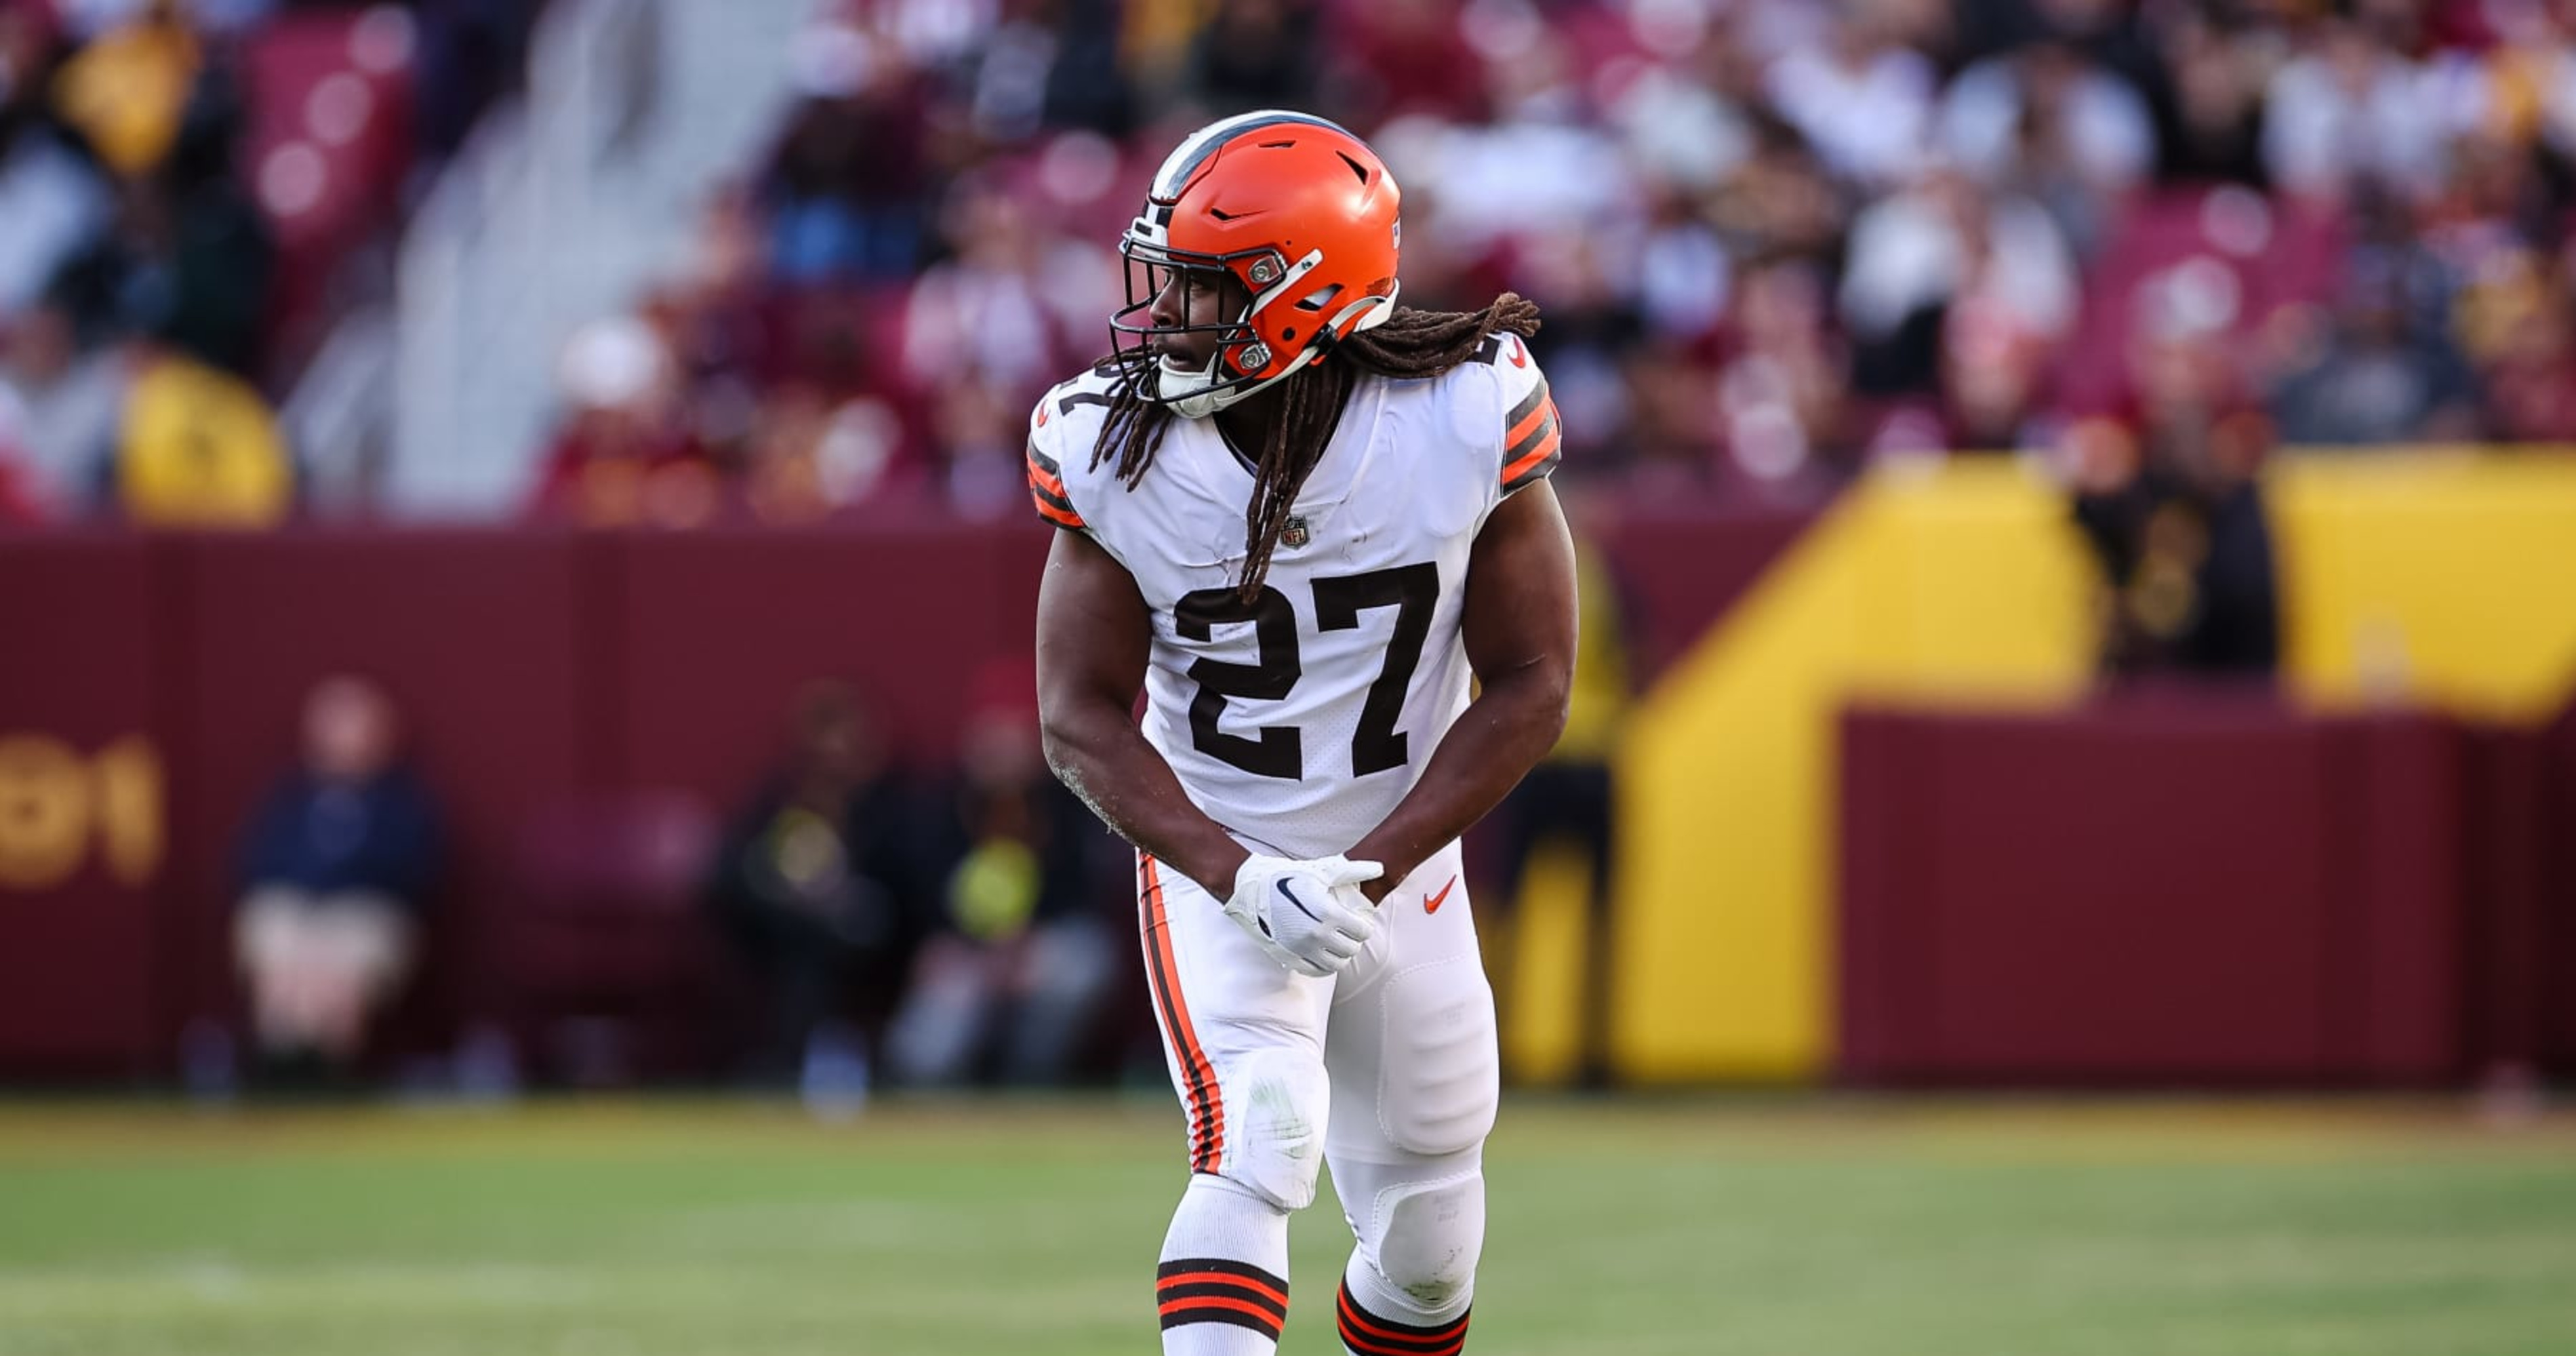 Report: Kareem Hunt won't return to Cleveland, Browns think he has lost  speed - NBC Sports